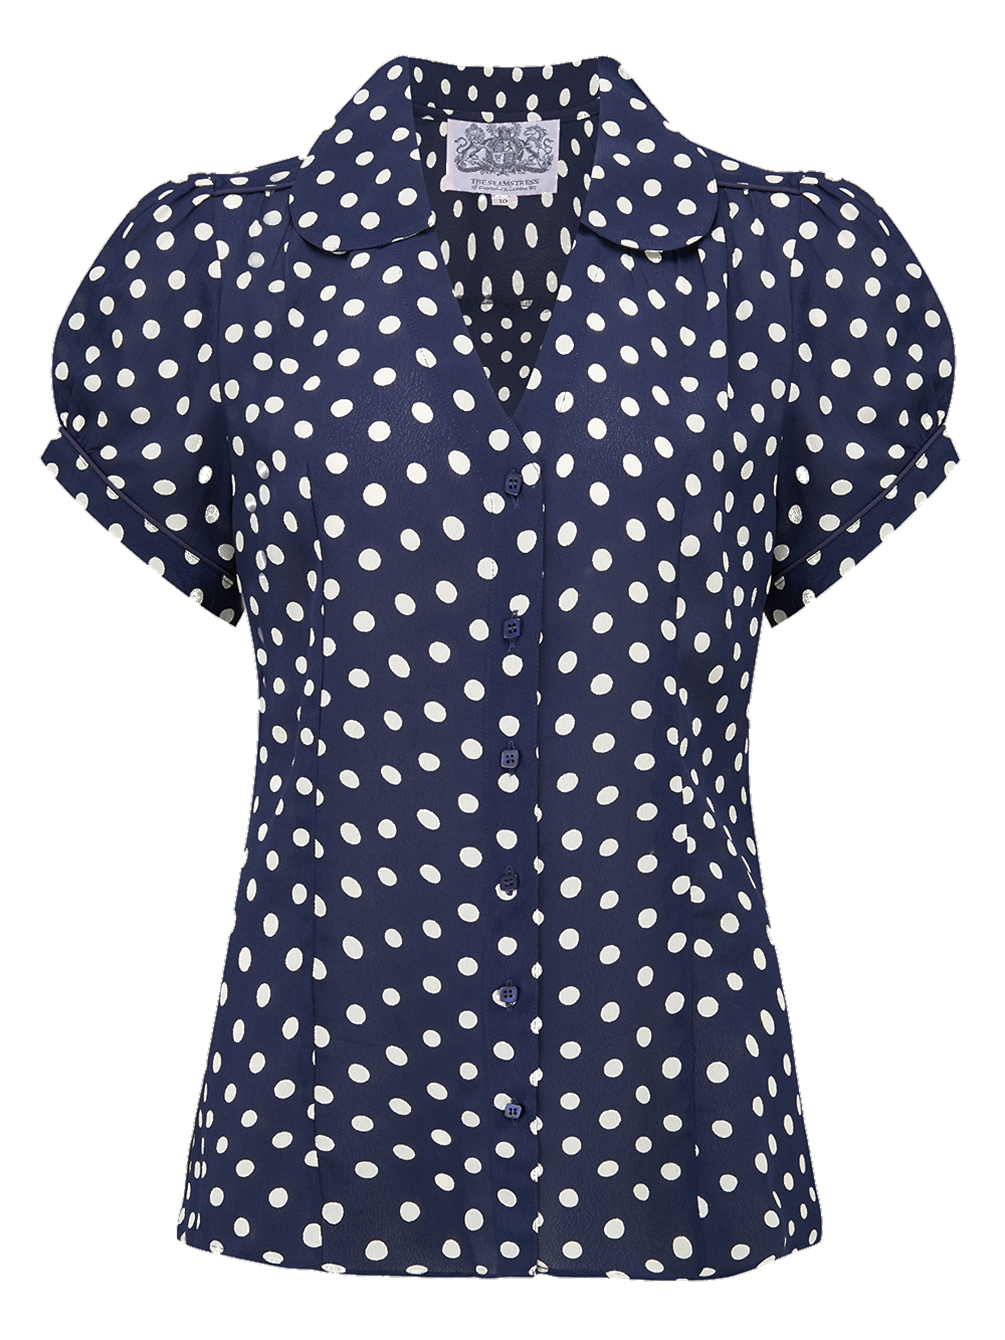 "Judy" Blouse in Navy Blue with Polka Spot, Authentic & Classic 1940s Vintage Style - True and authentic vintage style clothing, inspired by the Classic styles of CC41 , WW2 and the fun 1950s RocknRoll era, for everyday wear plus events like Goodwood Revival, Twinwood Festival and Viva Las Vegas Rockabilly Weekend Rock n Romance The Seamstress Of Bloomsbury